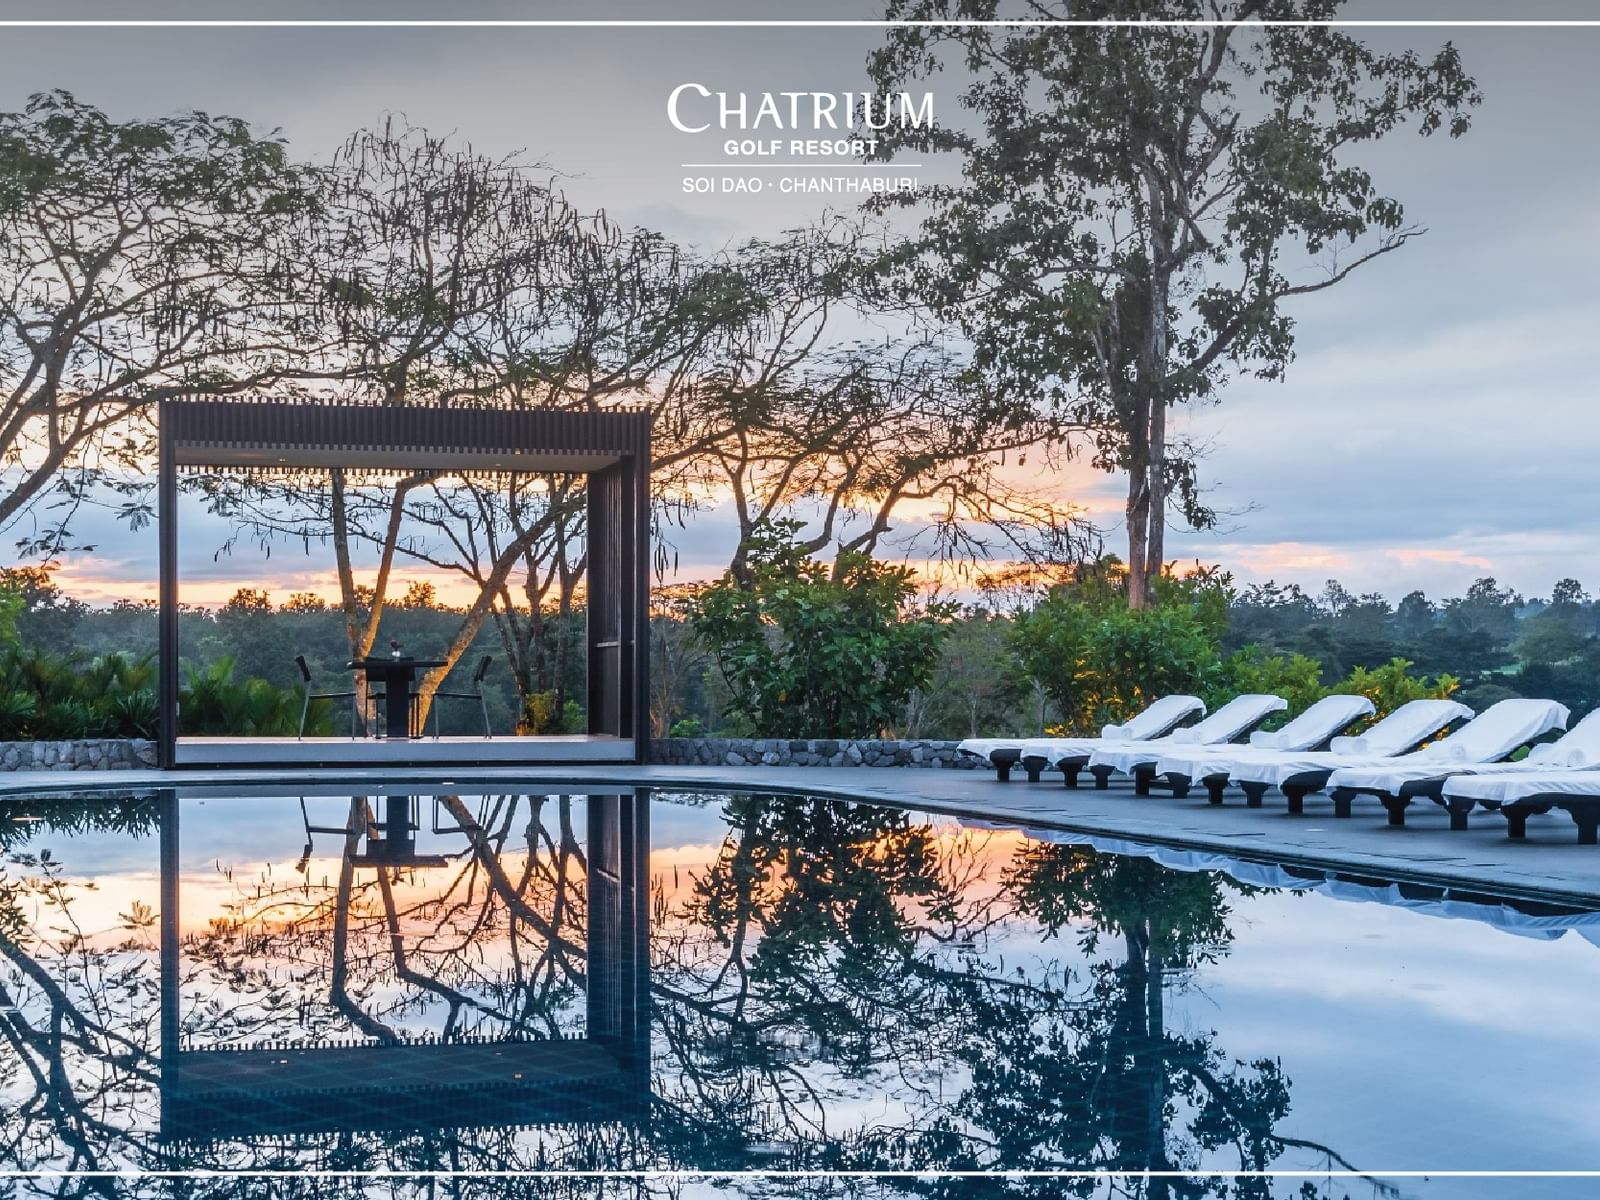 Banner of Chatrium Golf Resort with an outdoor pool background